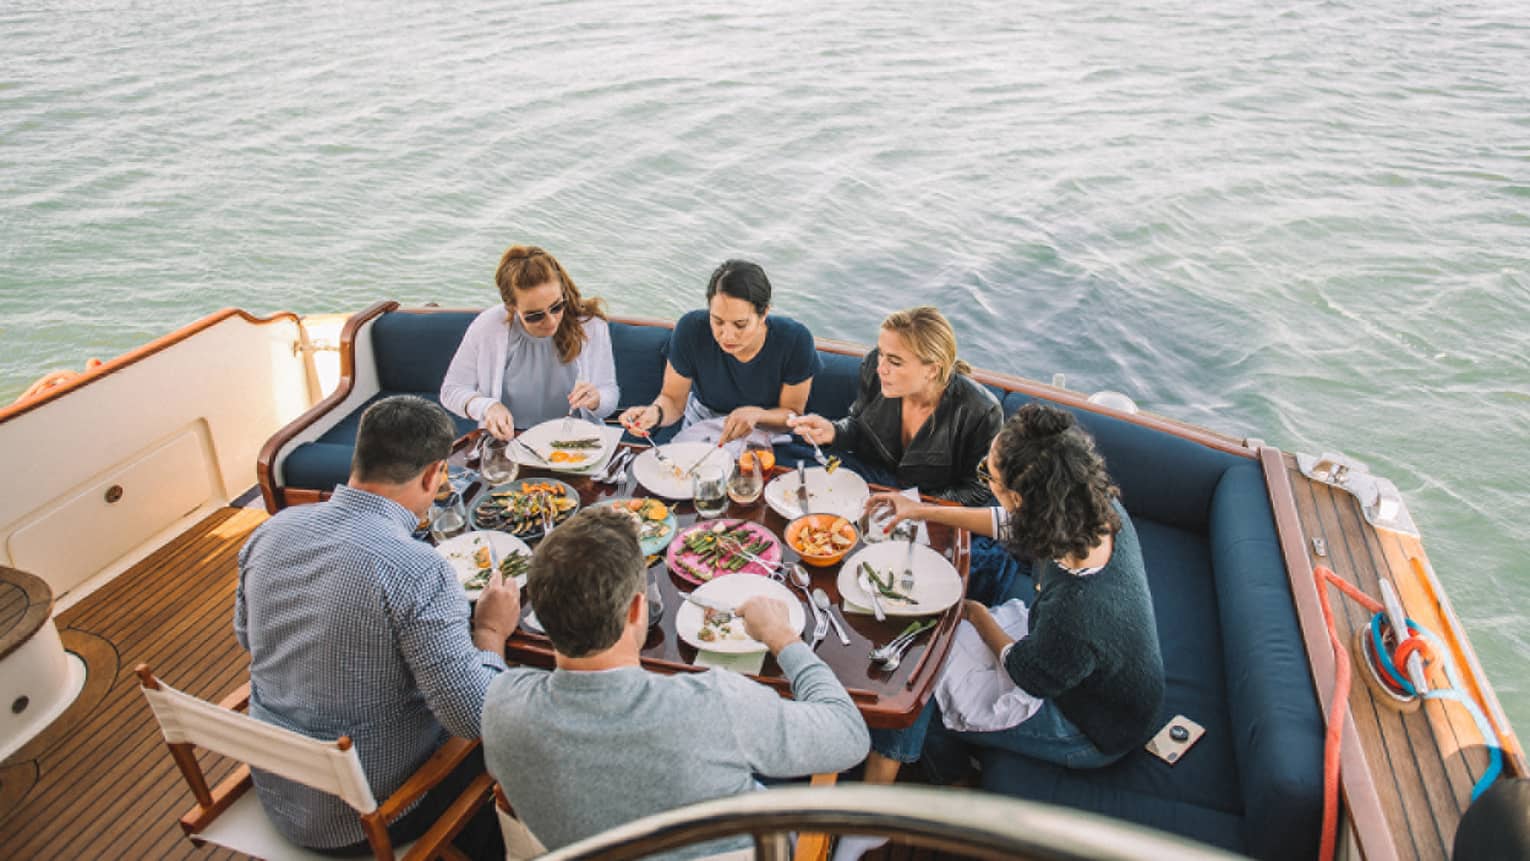 Group of friends dine at table at end of boat on water 